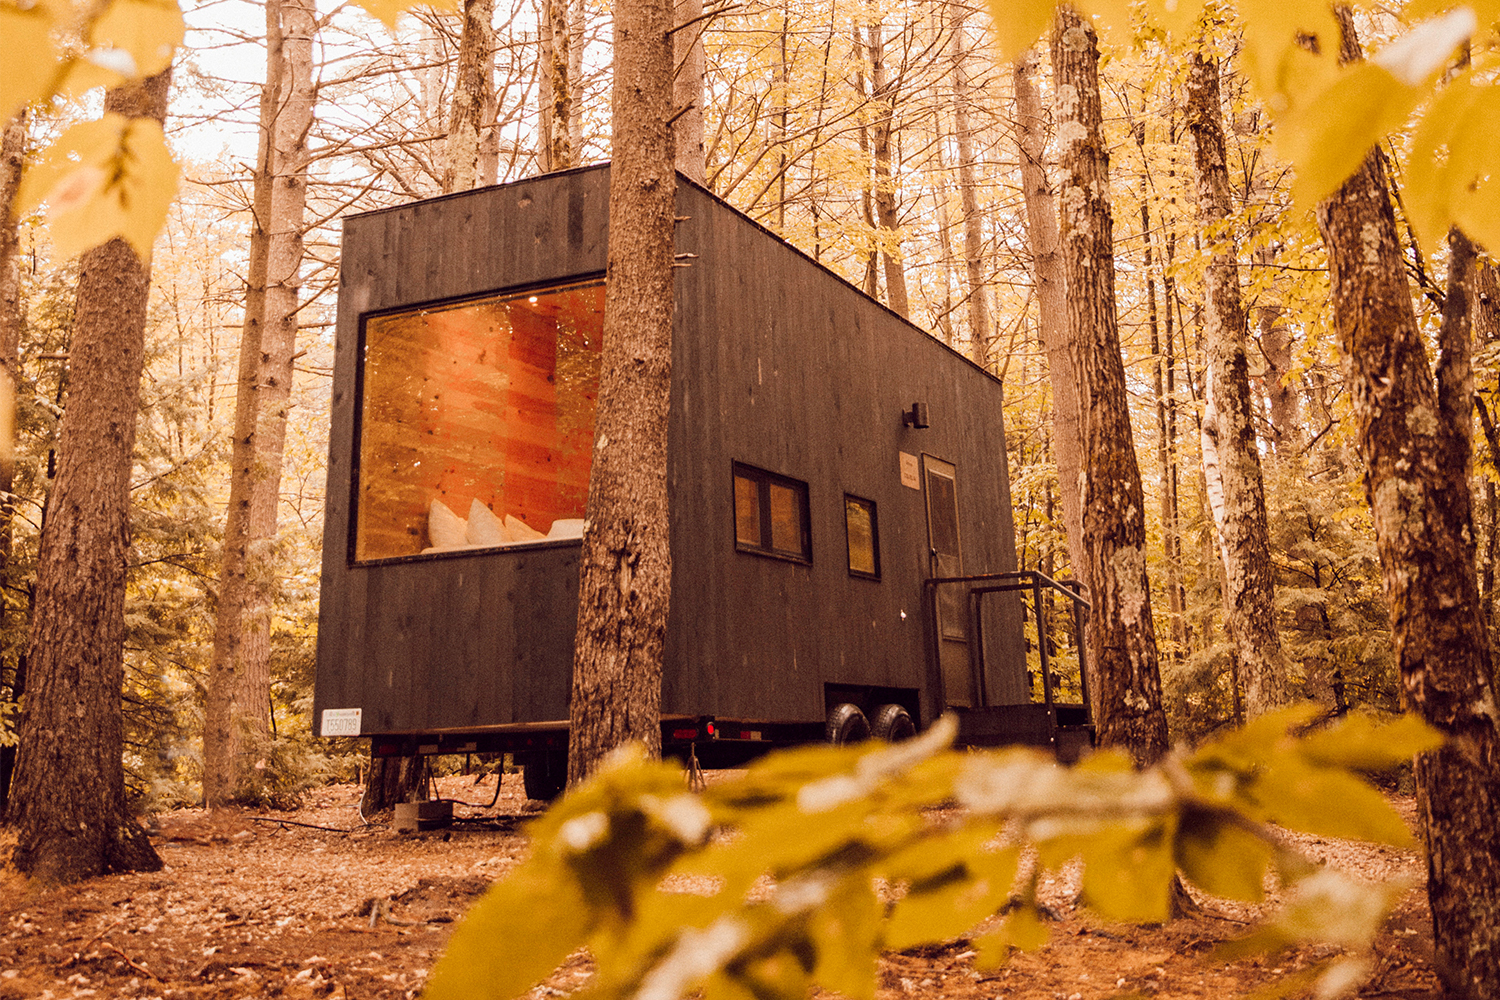 A tiny home available to book through Getaway with yellow autumn leaves surrounding it